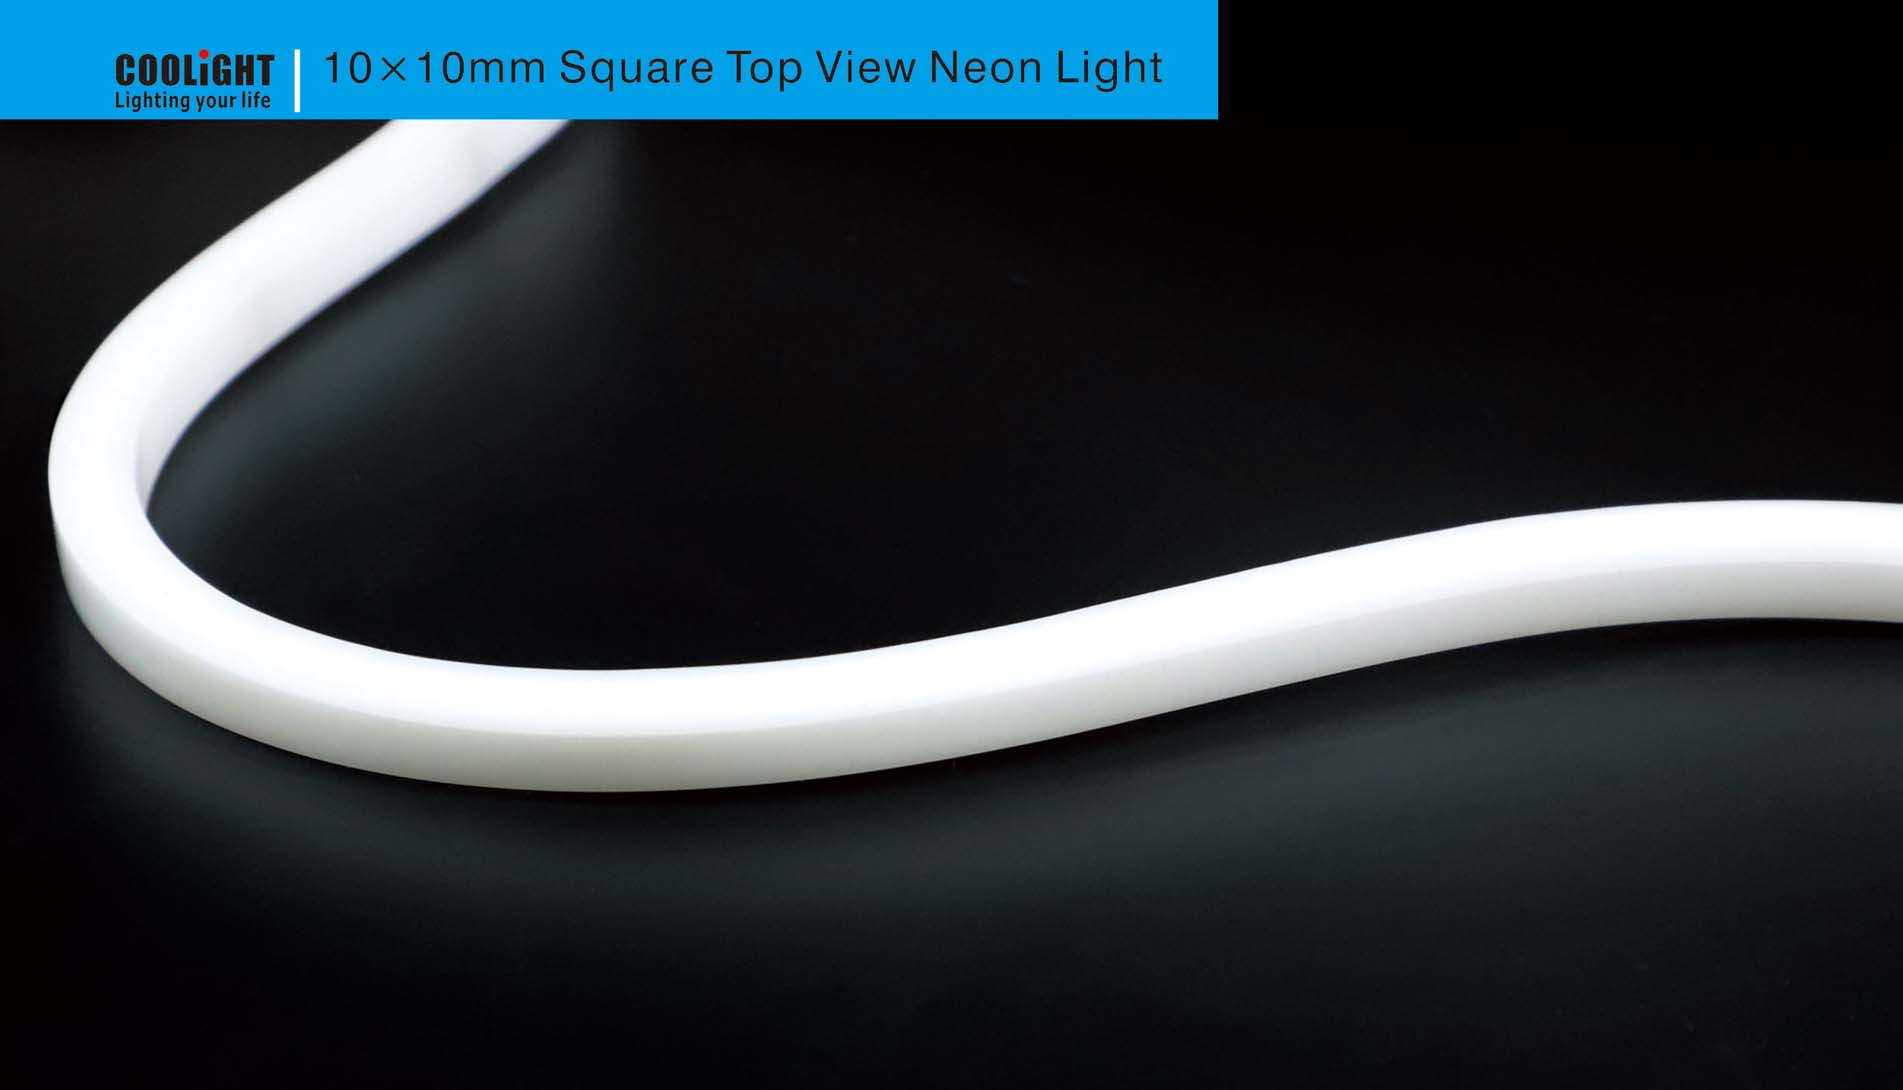 10x10mm square top view neon light